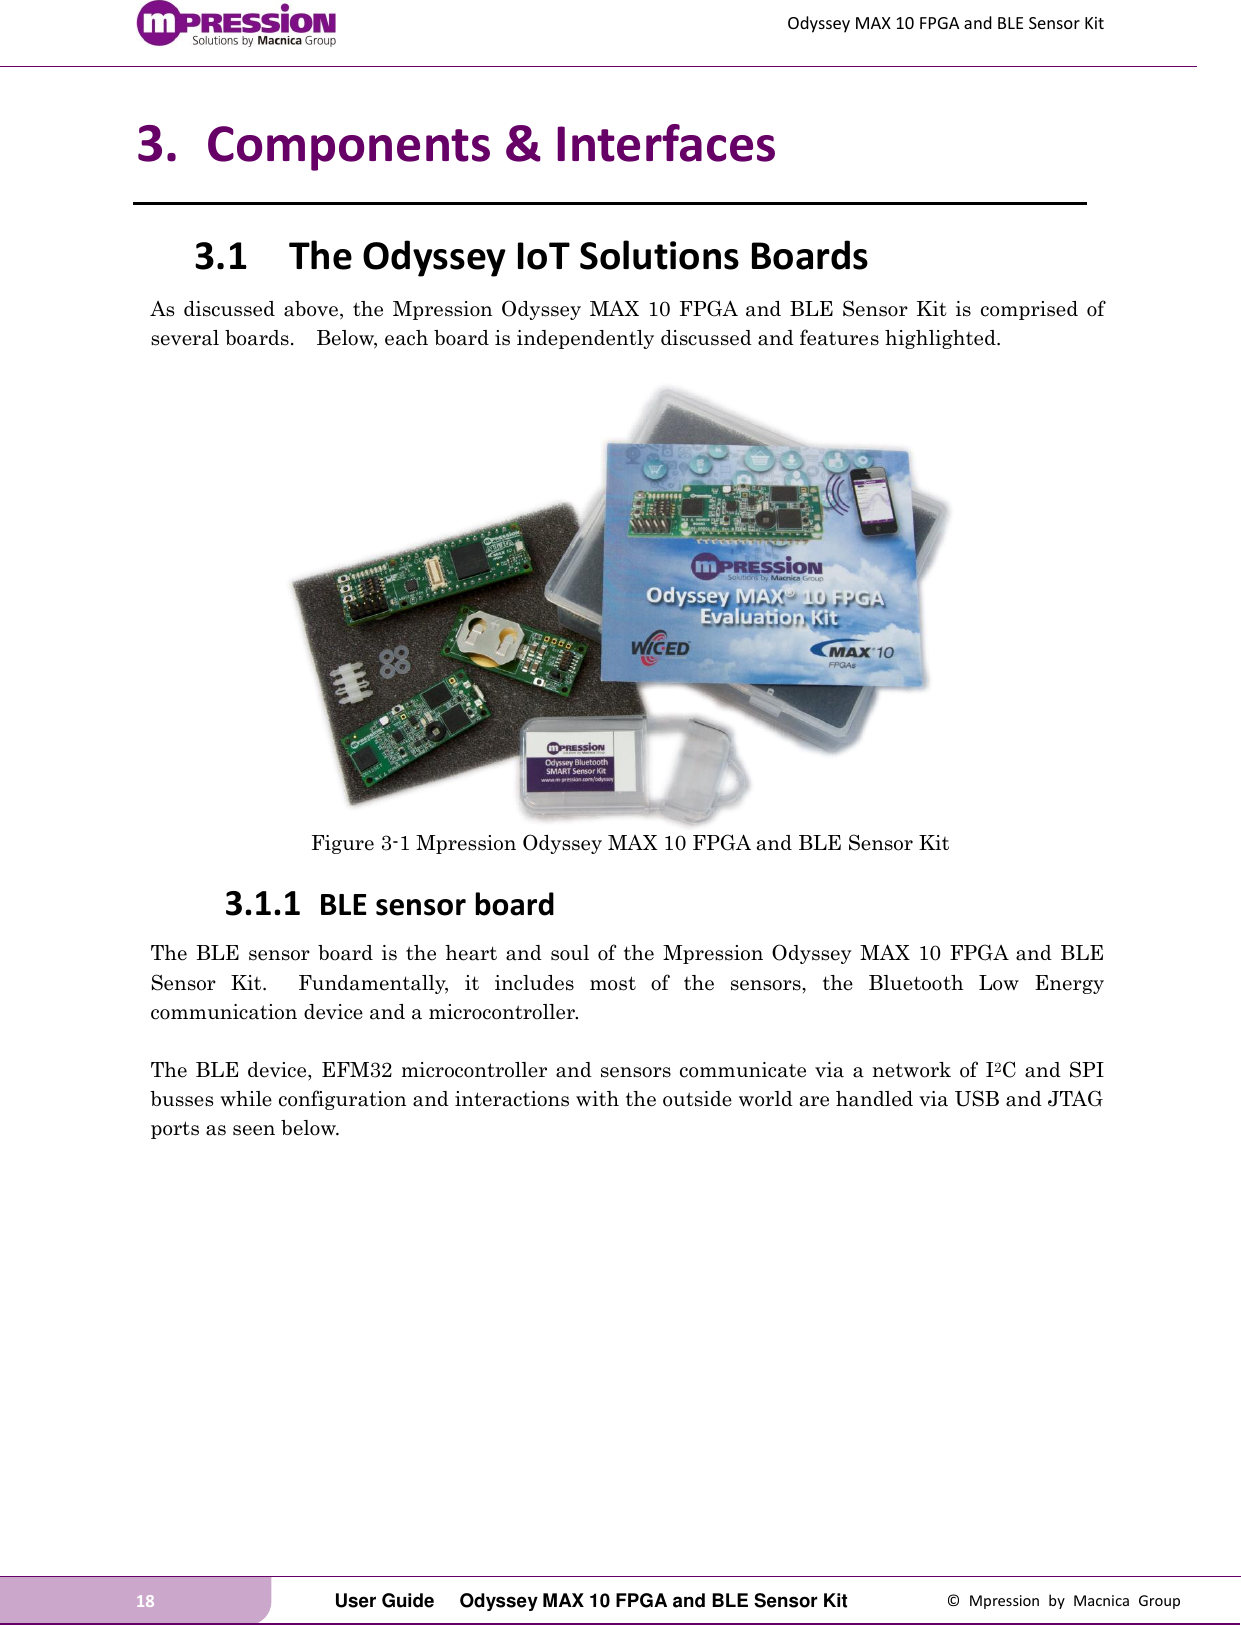 Odyssey MAX 10 FPGA and BLE Sensor Kit 18   User Guide  Odyssey MAX 10 FPGA and BLE Sensor Kit  ©  Mpression  by  Macnica  Group 3. Components &amp; Interfaces 3.1 The Odyssey IoT Solutions Boards As discussed  above,  the  Mpression Odyssey MAX  10  FPGA  and BLE  Sensor Kit is comprised of several boards.    Below, each board is independently discussed and features highlighted.     Figure 3-1 Mpression Odyssey MAX 10 FPGA and BLE Sensor Kit 3.1.1 BLE sensor board The BLE sensor board  is  the heart  and  soul of the  Mpression  Odyssey MAX  10  FPGA and  BLE Sensor  Kit.  Fundamentally,  it  includes  most  of  the  sensors,  the  Bluetooth  Low  Energy communication device and a microcontroller.  The BLE device, EFM32 microcontroller and sensors communicate via a network of  I2C and SPI busses while configuration and interactions with the outside world are handled via USB and JTAG ports as seen below.  